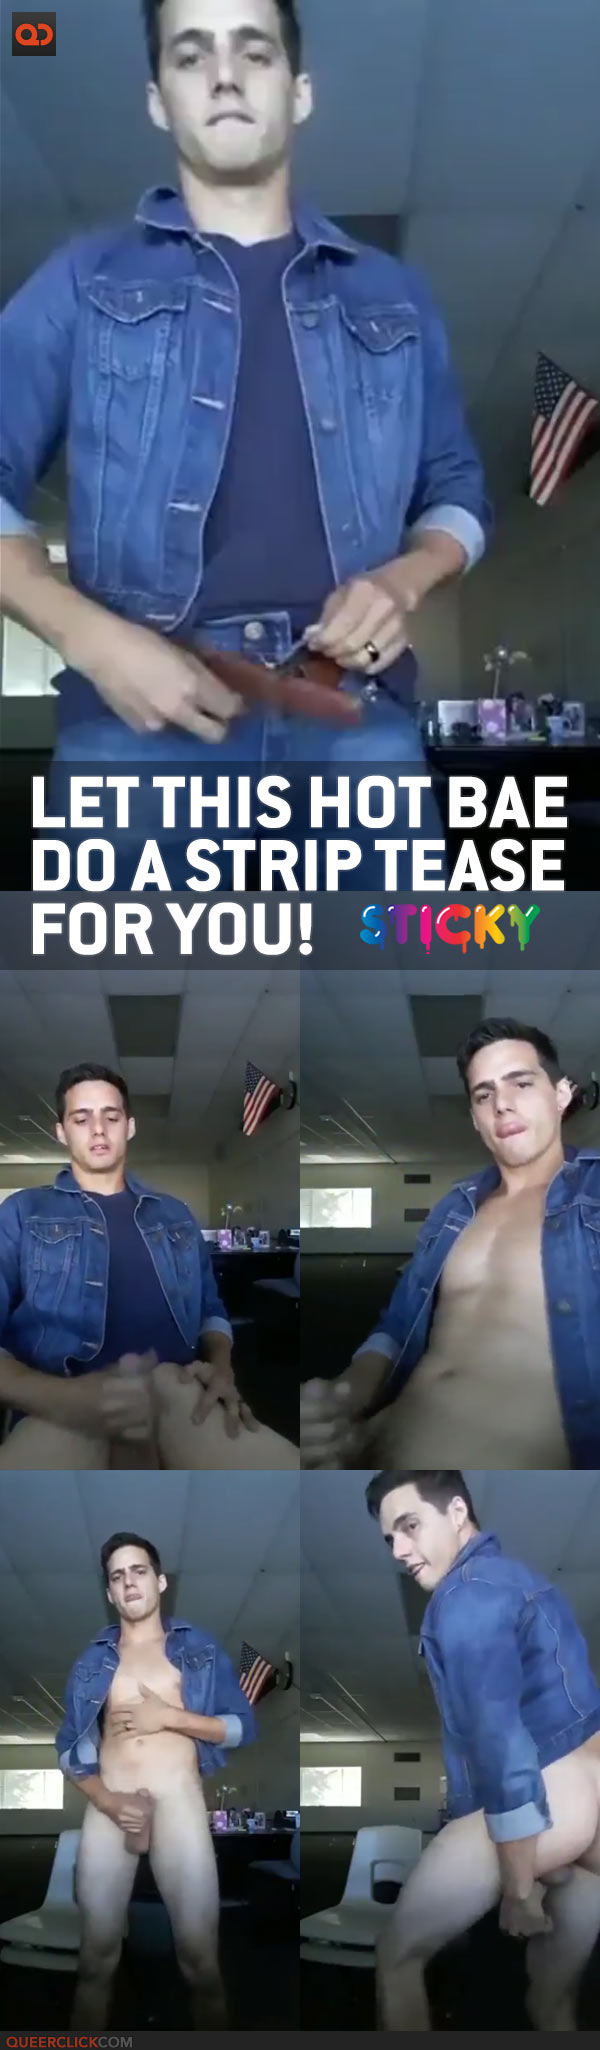 Let This Hot Bae Do A Strip Tease For You!